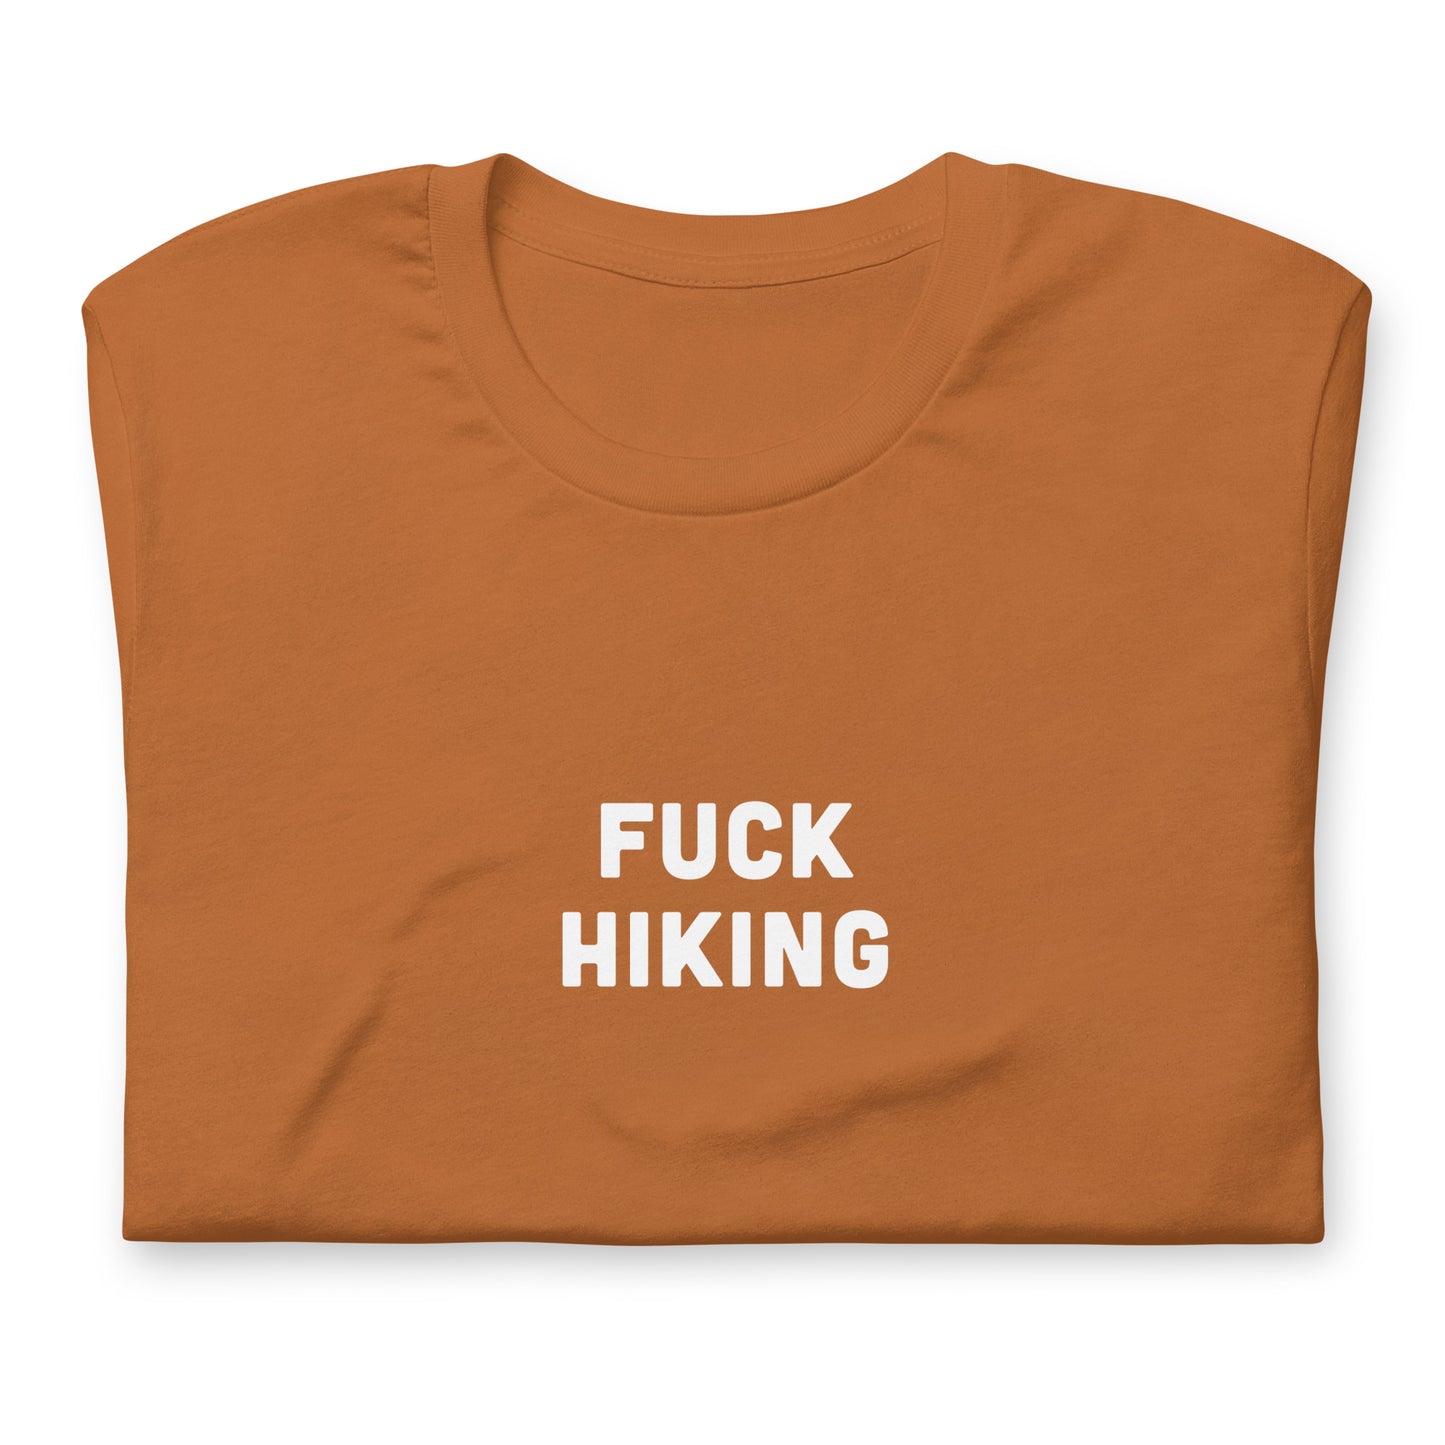 Fuck Hiking T-Shirt Size XL Color Navy